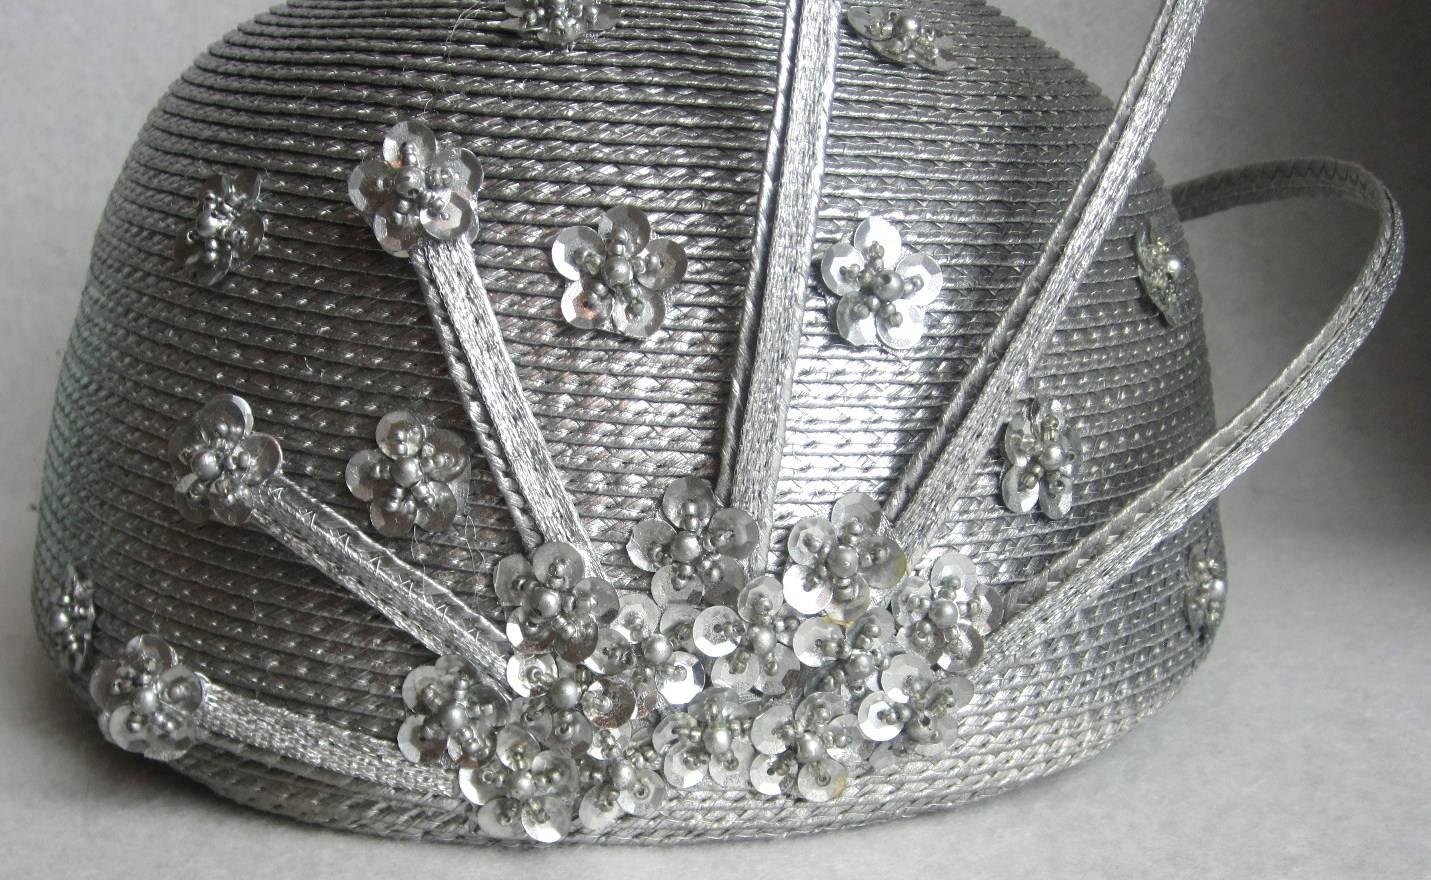 Stunning silver Sculptural hat that will beam you up! Sequins scattered at the sides. Interior circumference 22 in. Approx. size 7. We have been selling on this platform since 2013 so be sure to check our storefront for hundreds of items including